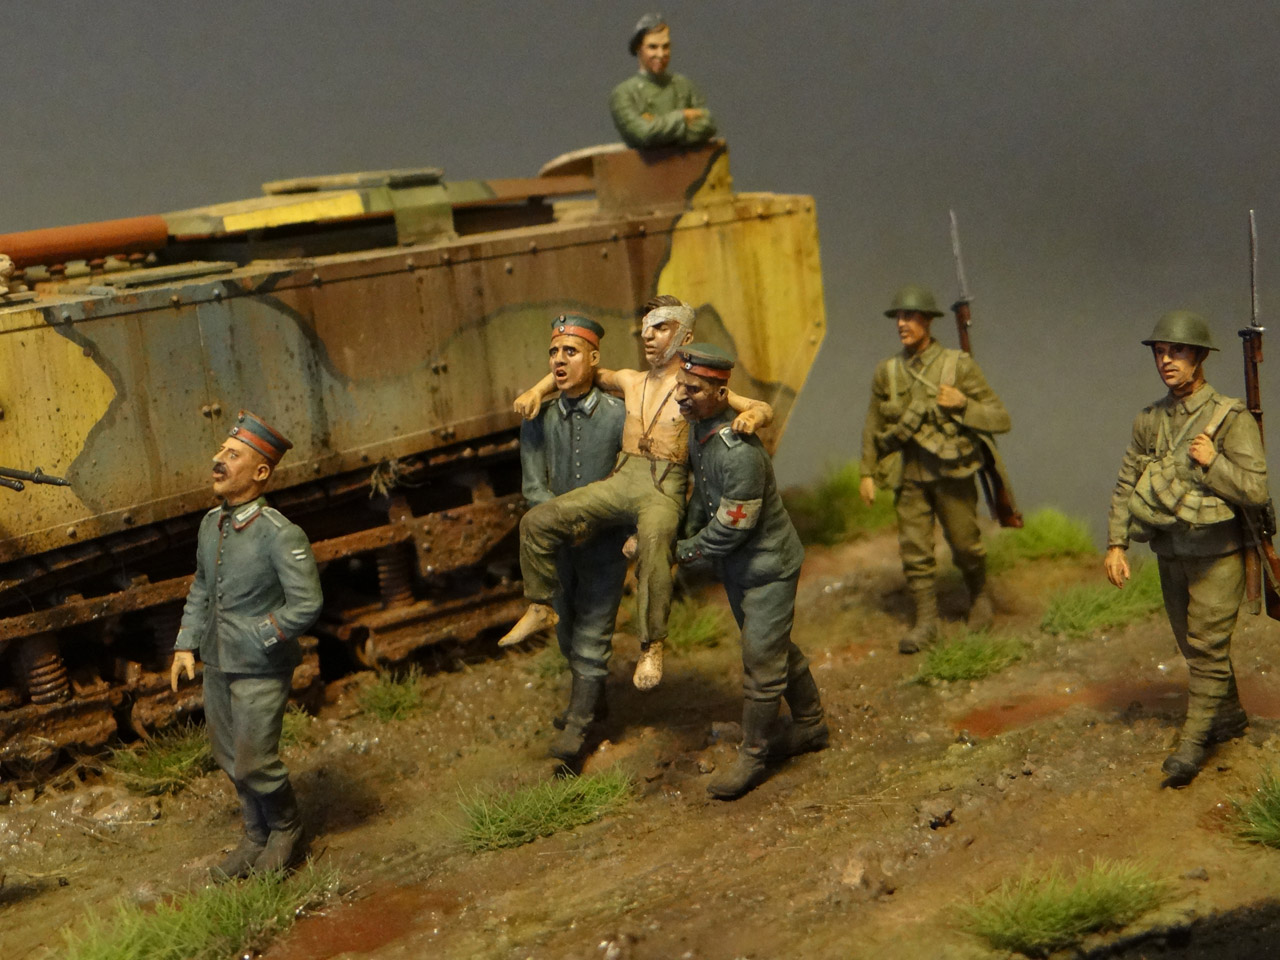 Dioramas and Vignettes: Victors and losers, photo #7